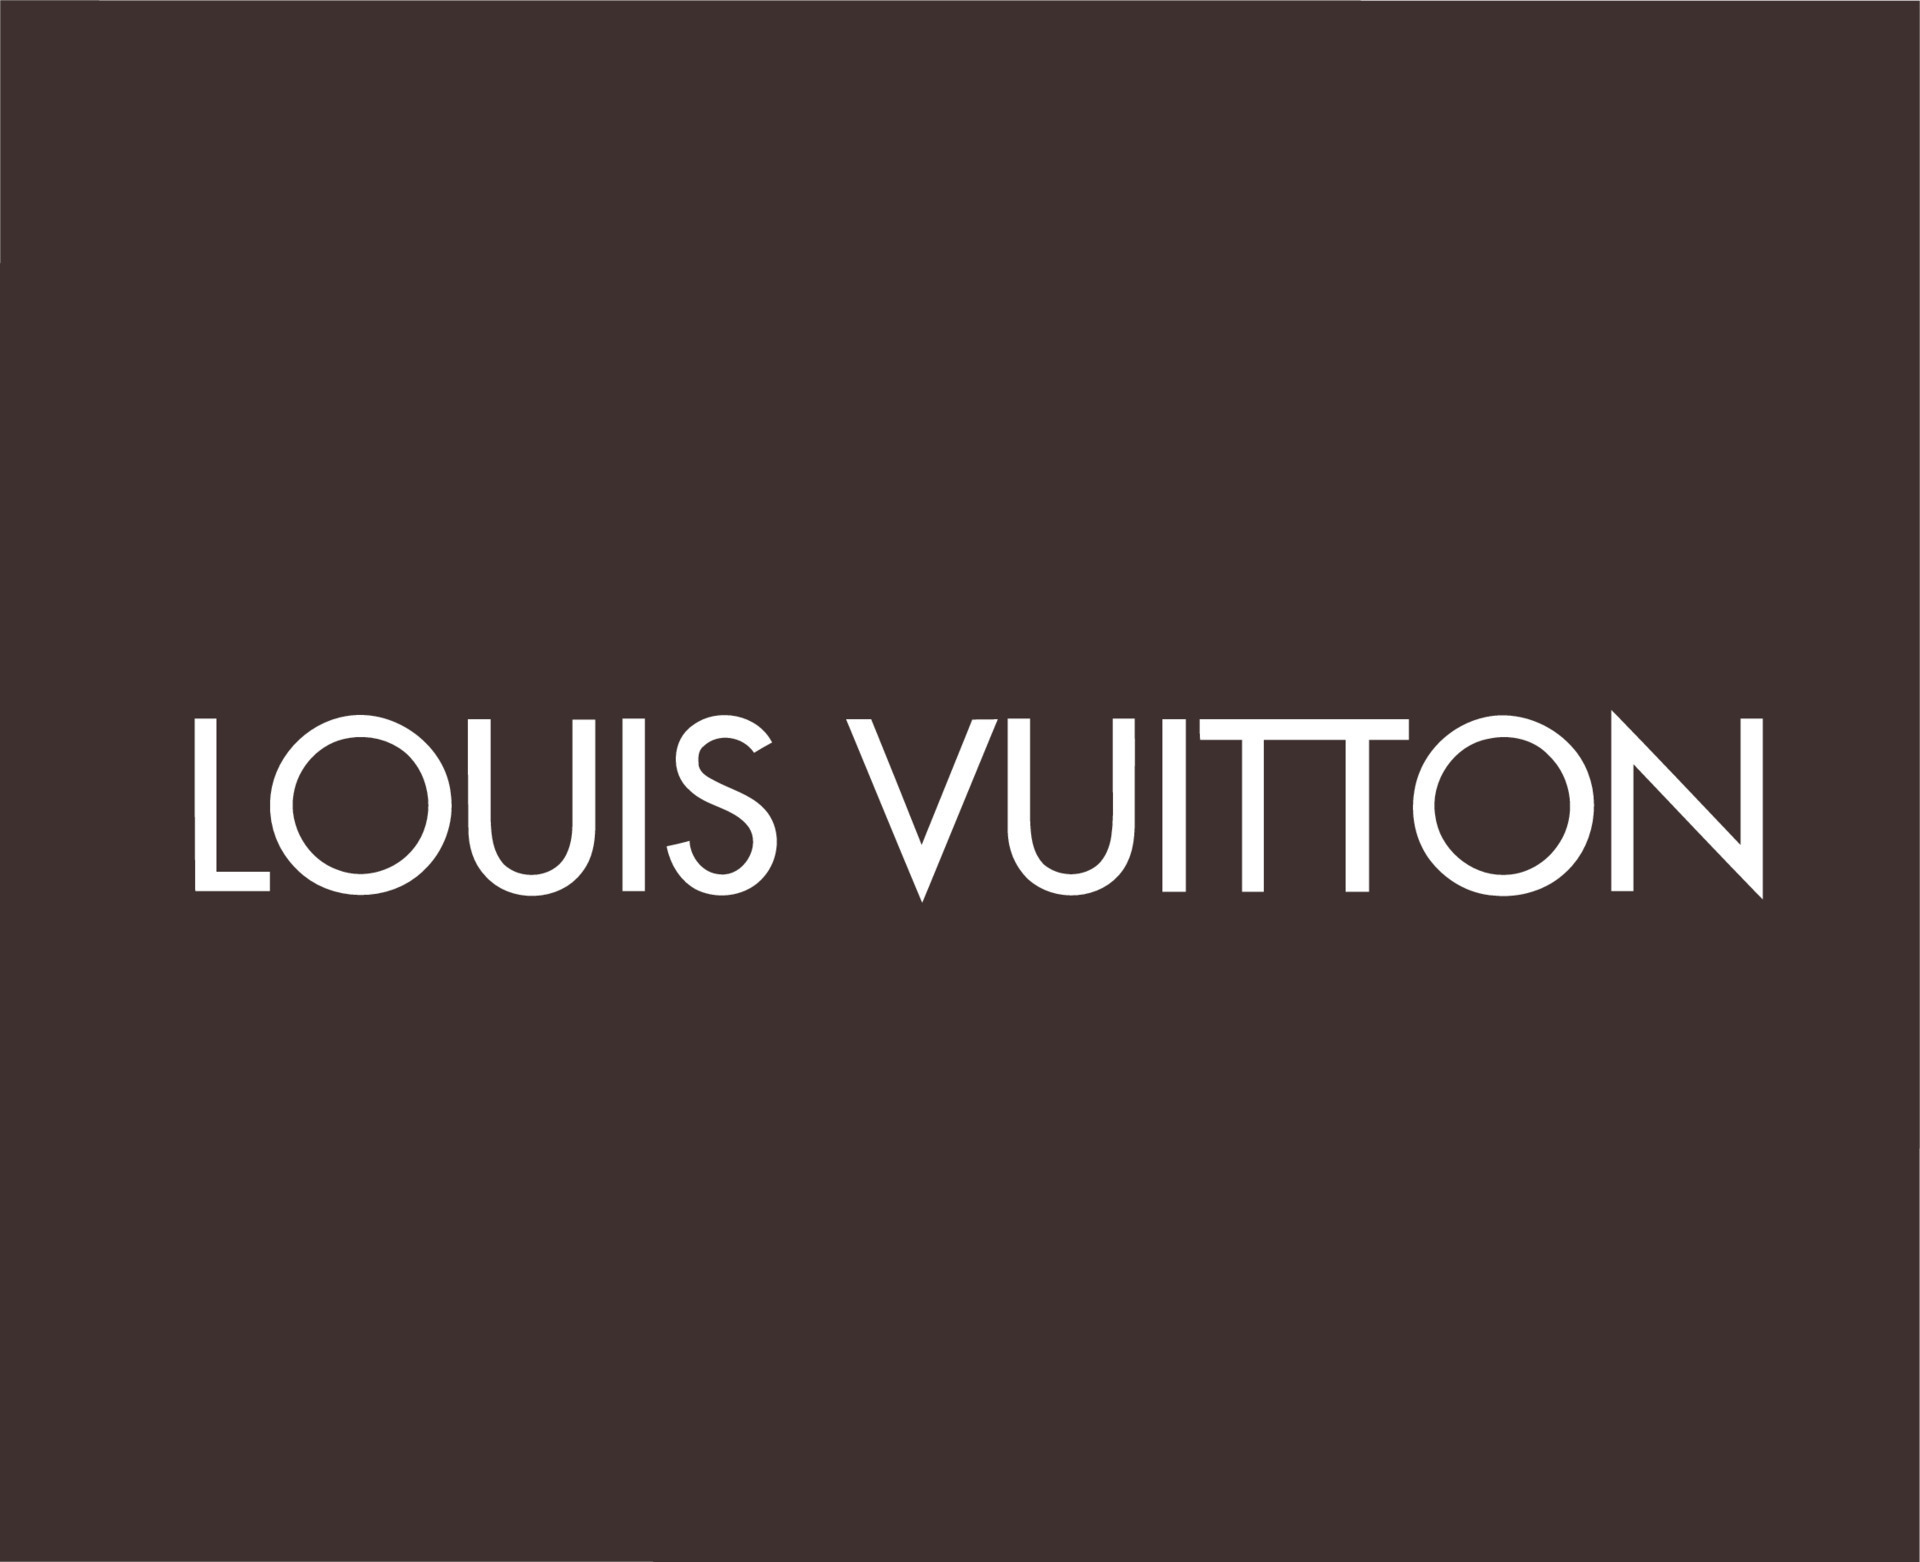 Louis Vuitton Logo Brand With Name Black Symbol Design Clothes Fashion  Vector Illustration With Brown Background 23871180 Vector Art at Vecteezy